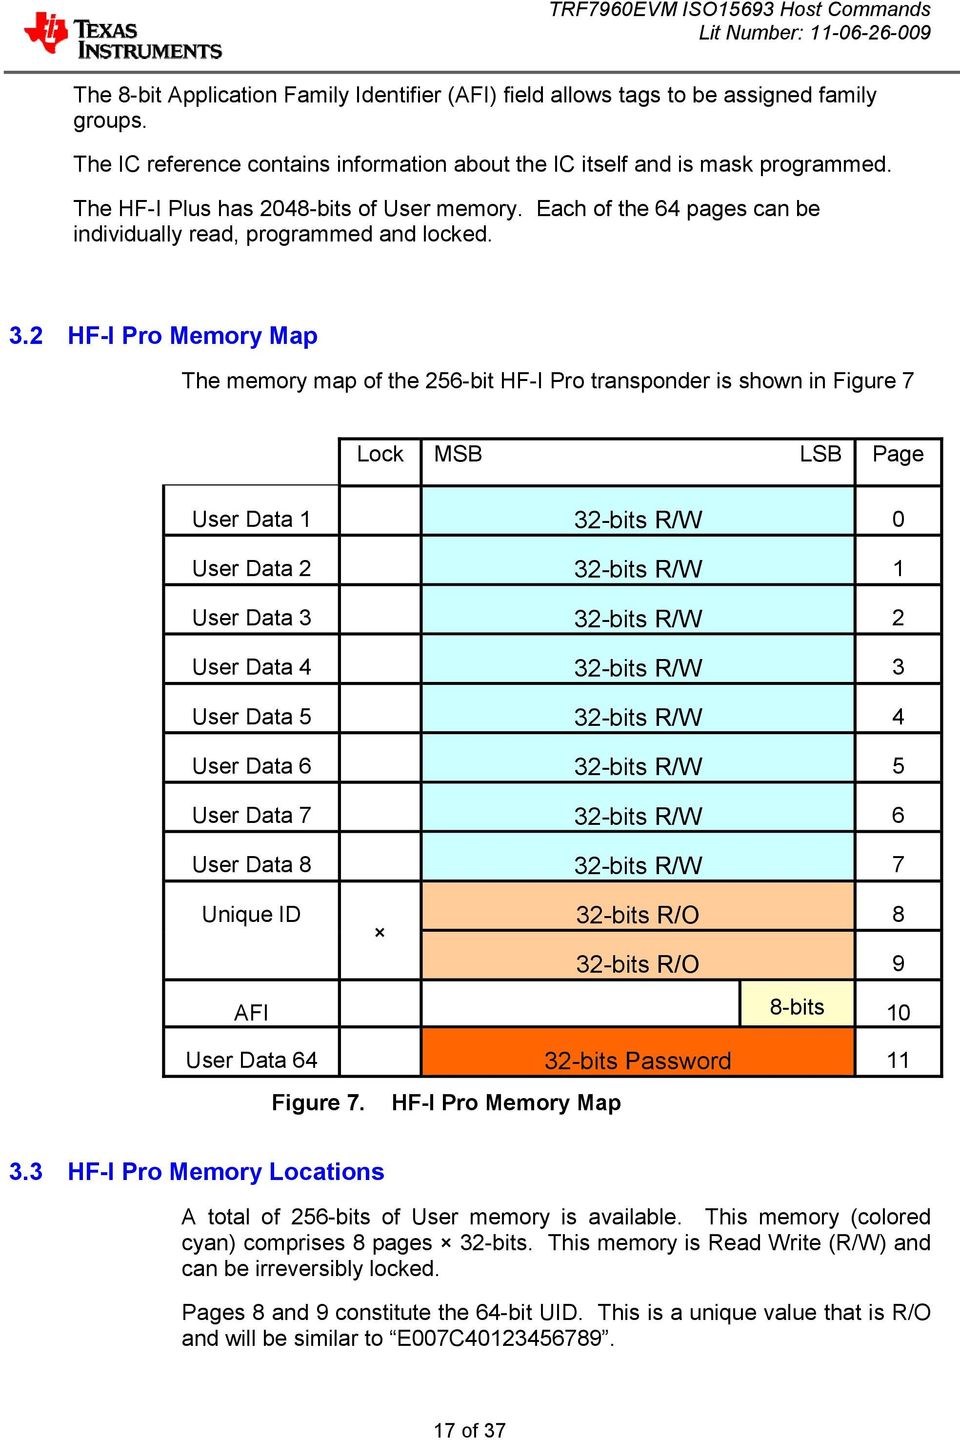 2 HF-I Pro Memory Map The memory map of the 256-bit HF-I Pro transponder is shown in Figure 7 Lock MSB LSB Page User Data 1 32-bits R/W 0 User Data 2 32-bits R/W 1 User Data 3 32-bits R/W 2 User Data